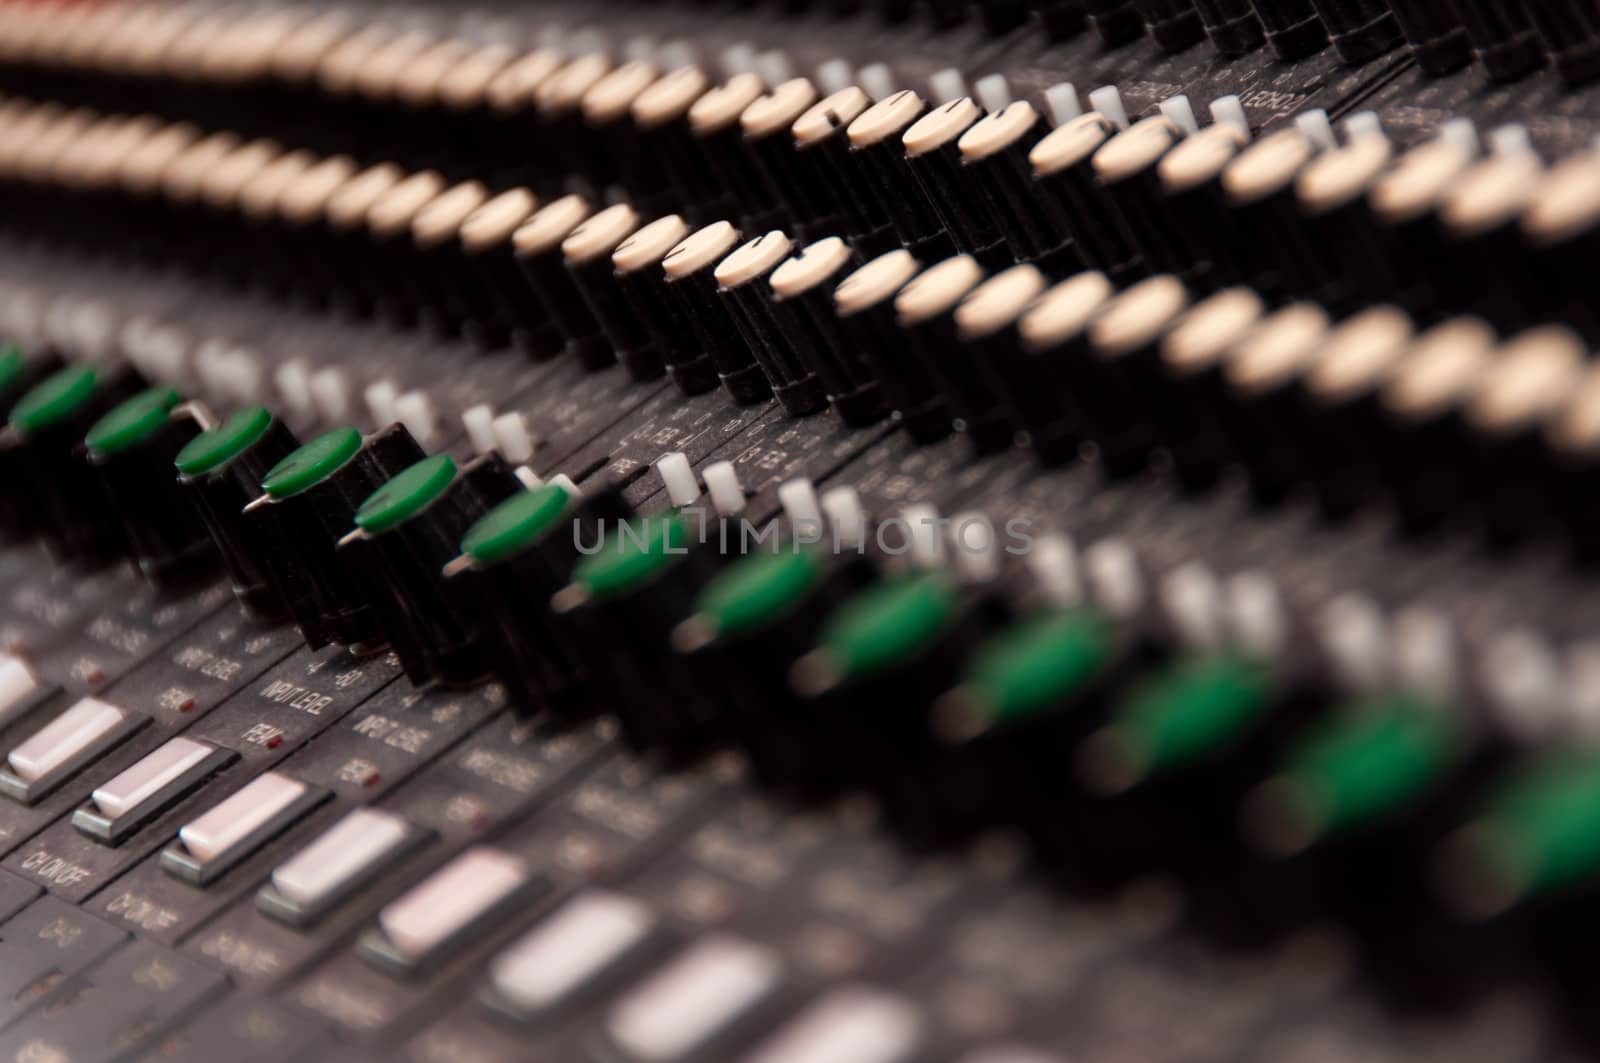 Many Knobs designed to control the output of sound